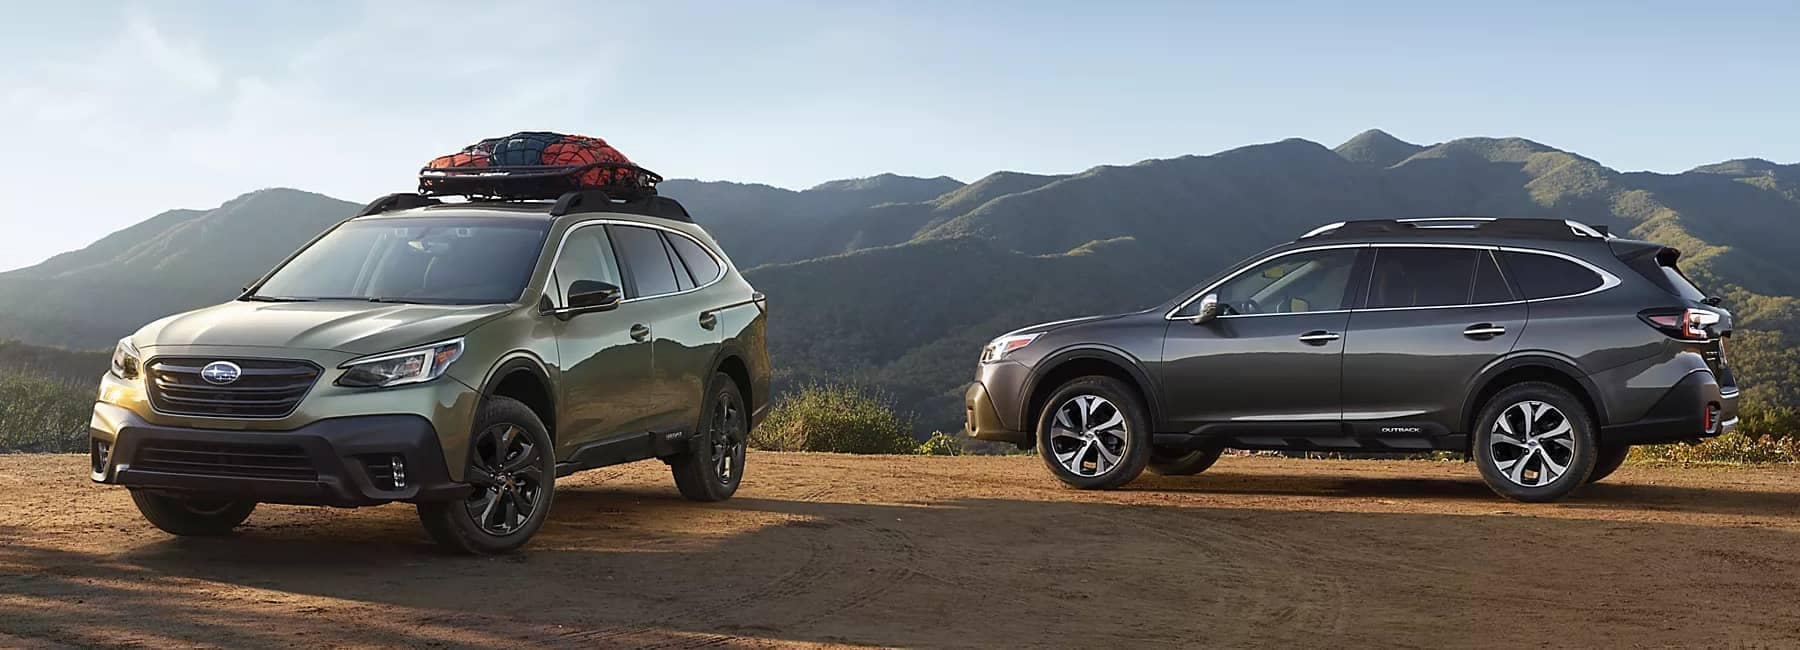 2022-Subaru-Outback-hero-2-parked-cars-in-mountain-range-background